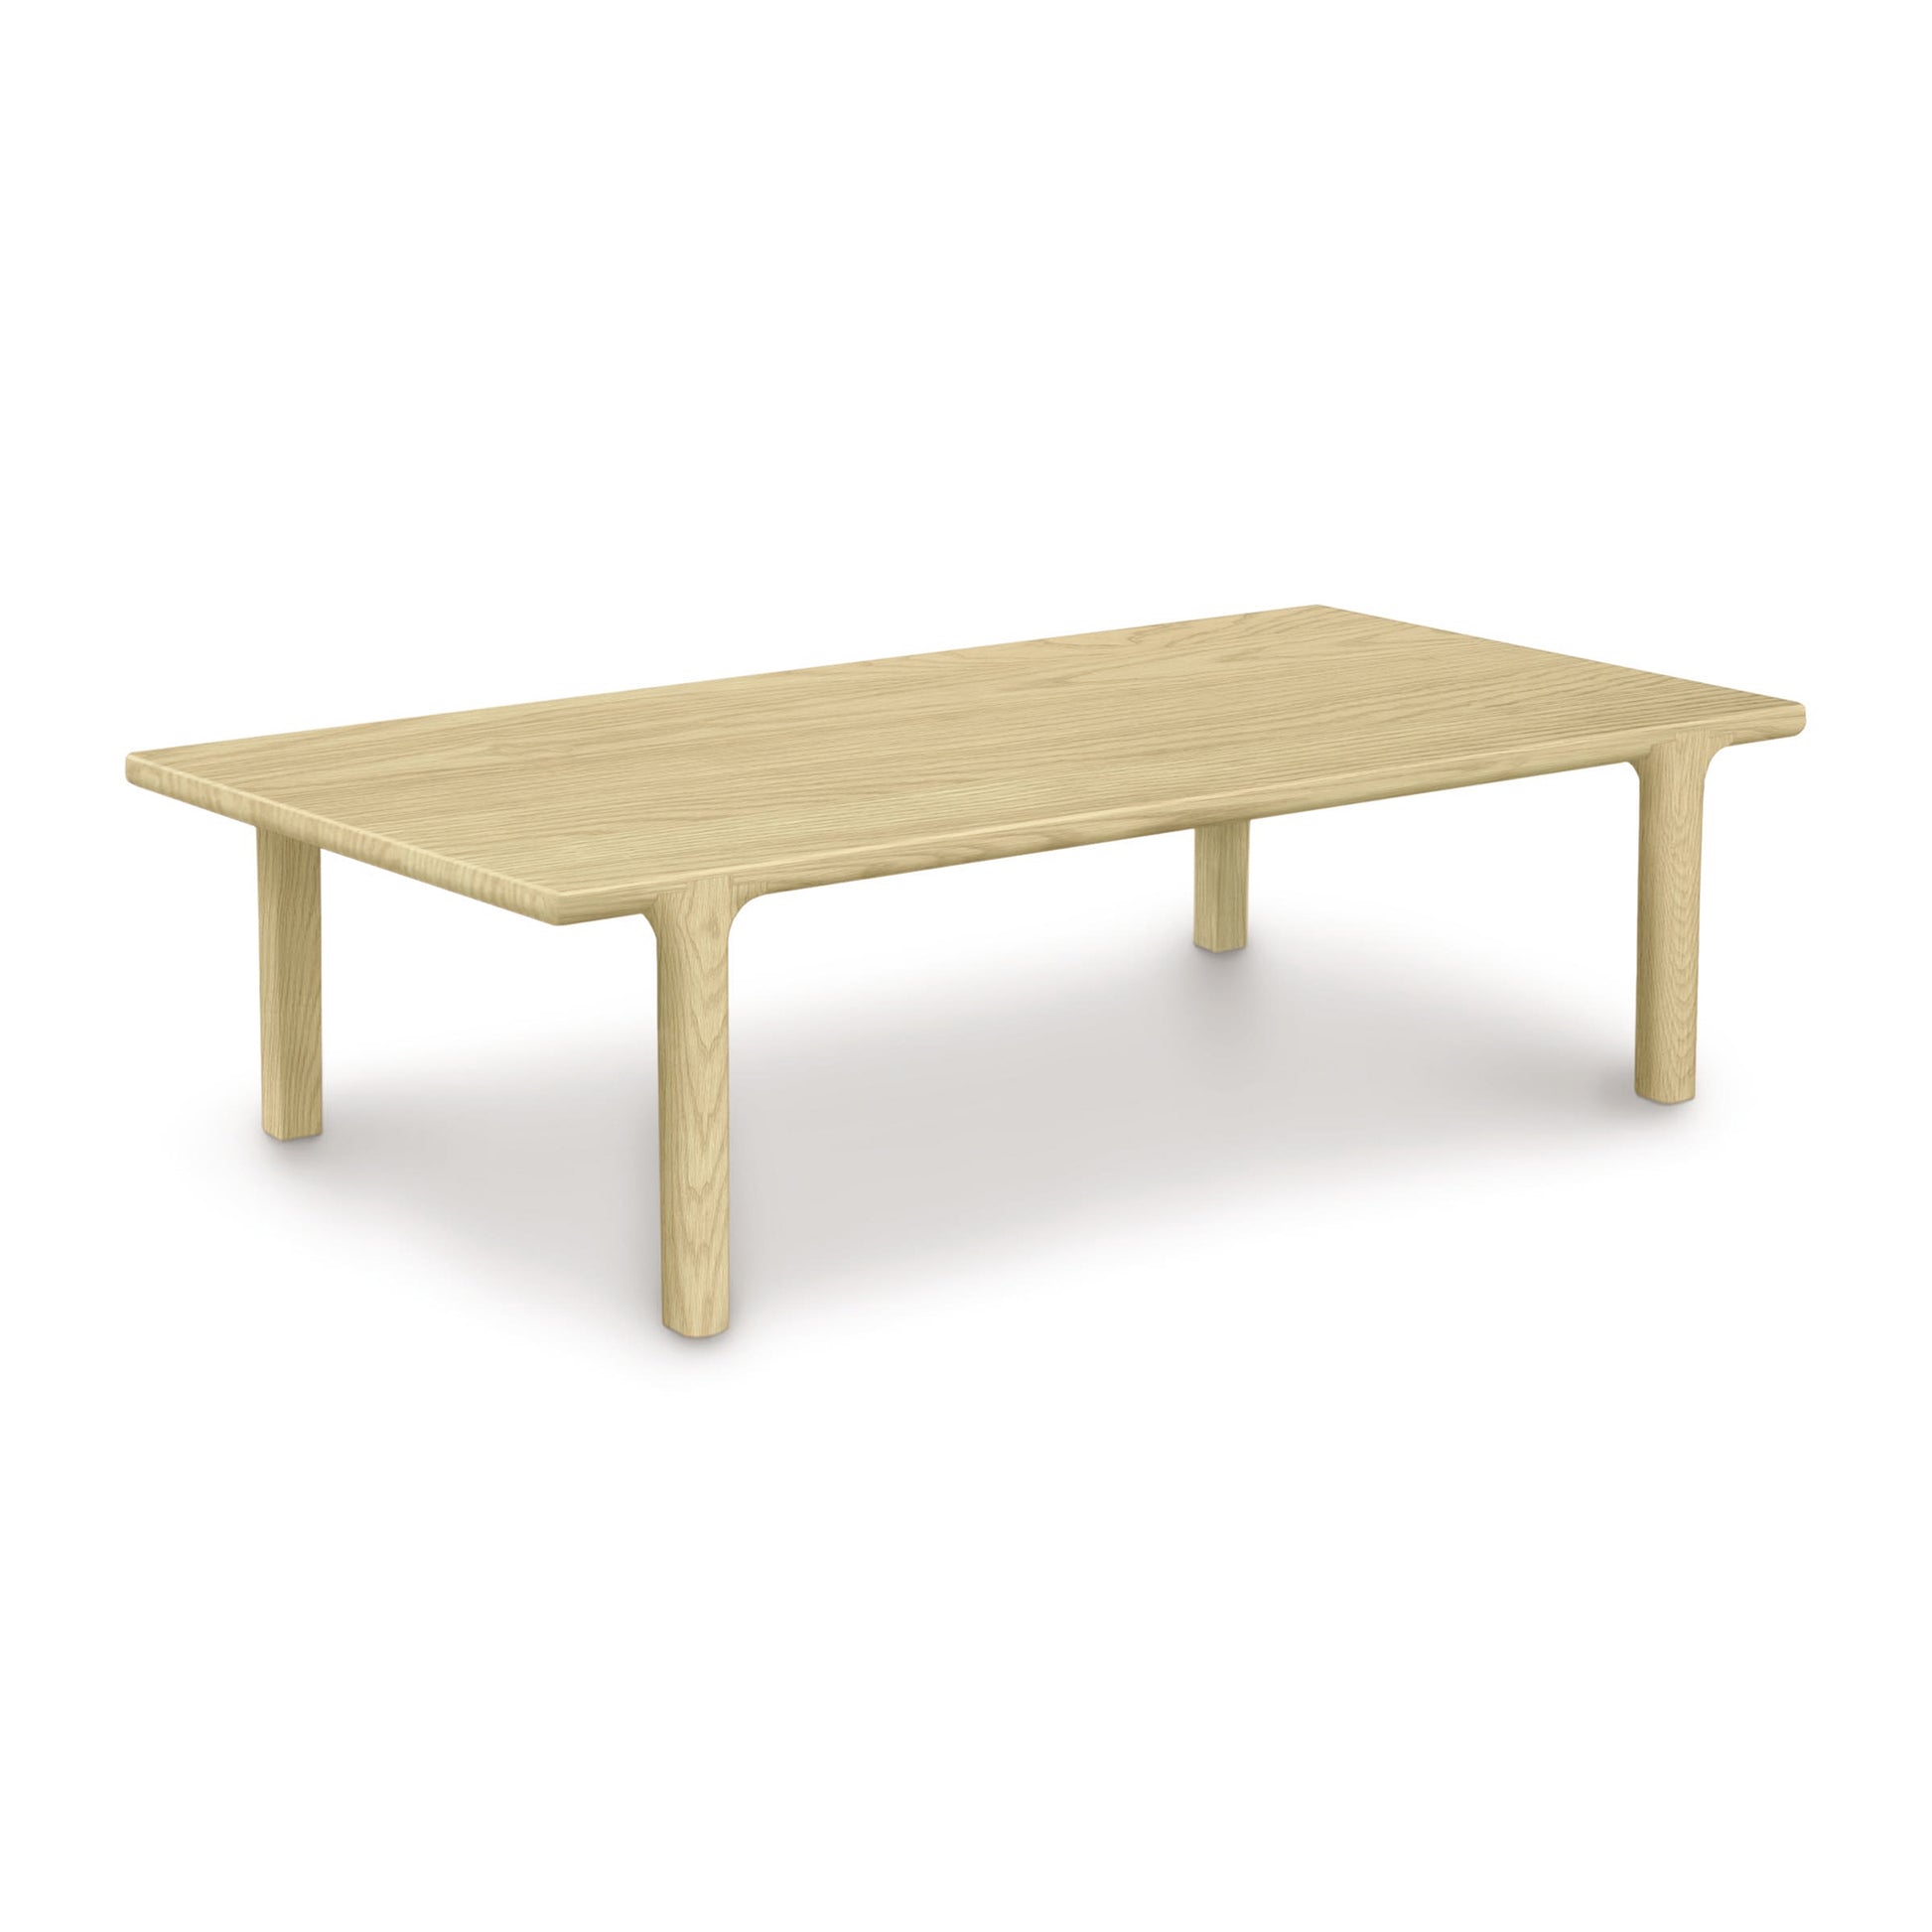 A Copeland Furniture Sierra Rectangular Coffee Table on a white background.